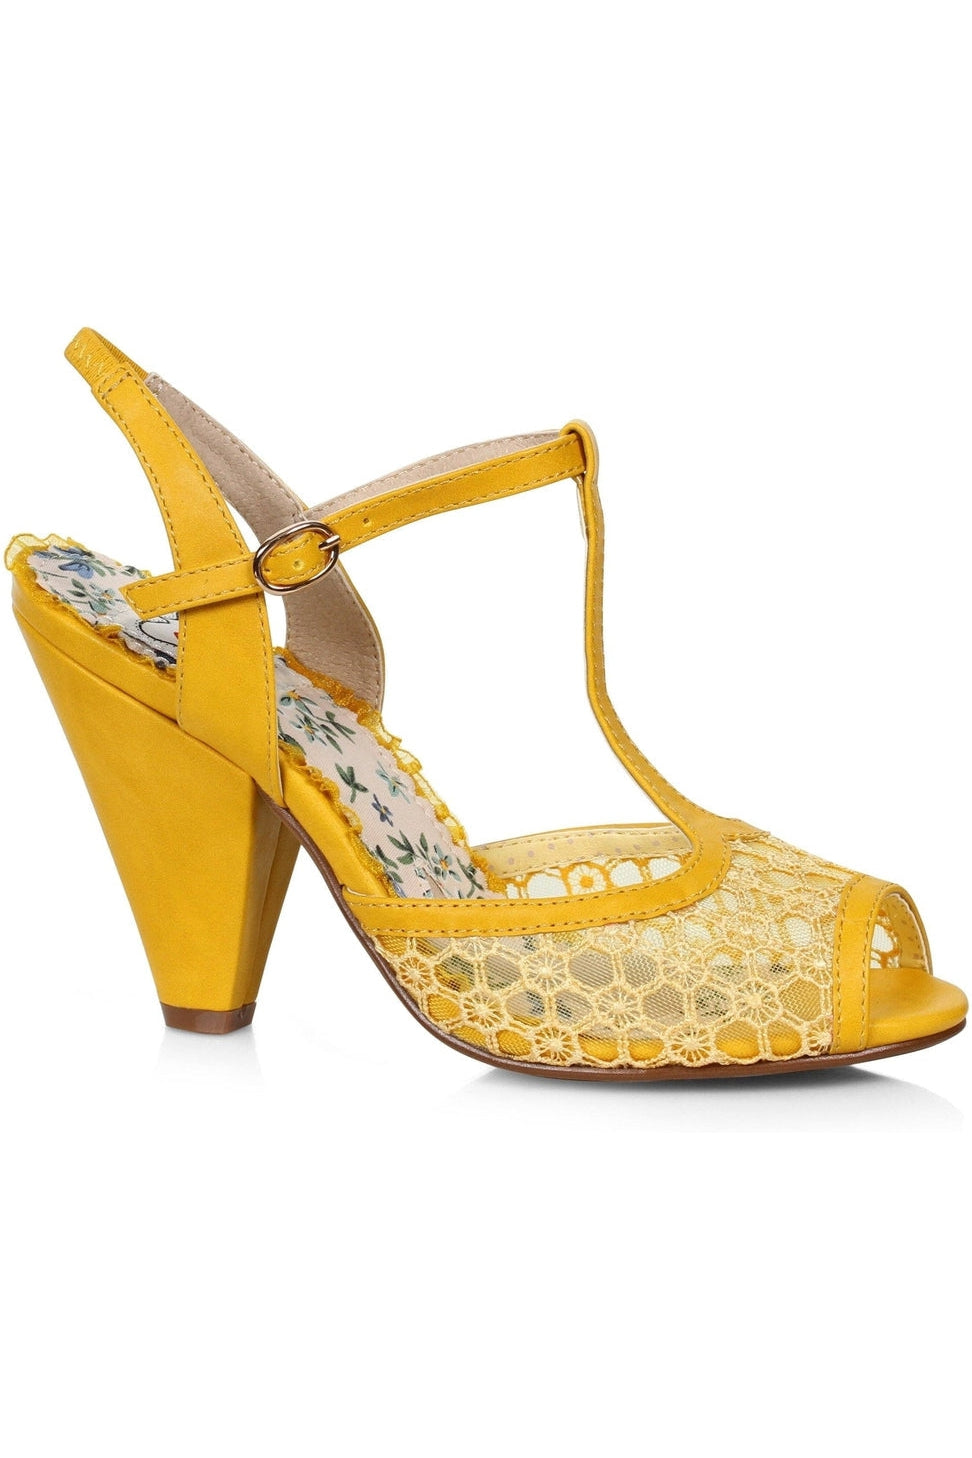 Bettie Page Brooklyn Pump | Yellow Faux Leather-Pumps-Bettie Page by Ellie-SEXYSHOES.COM